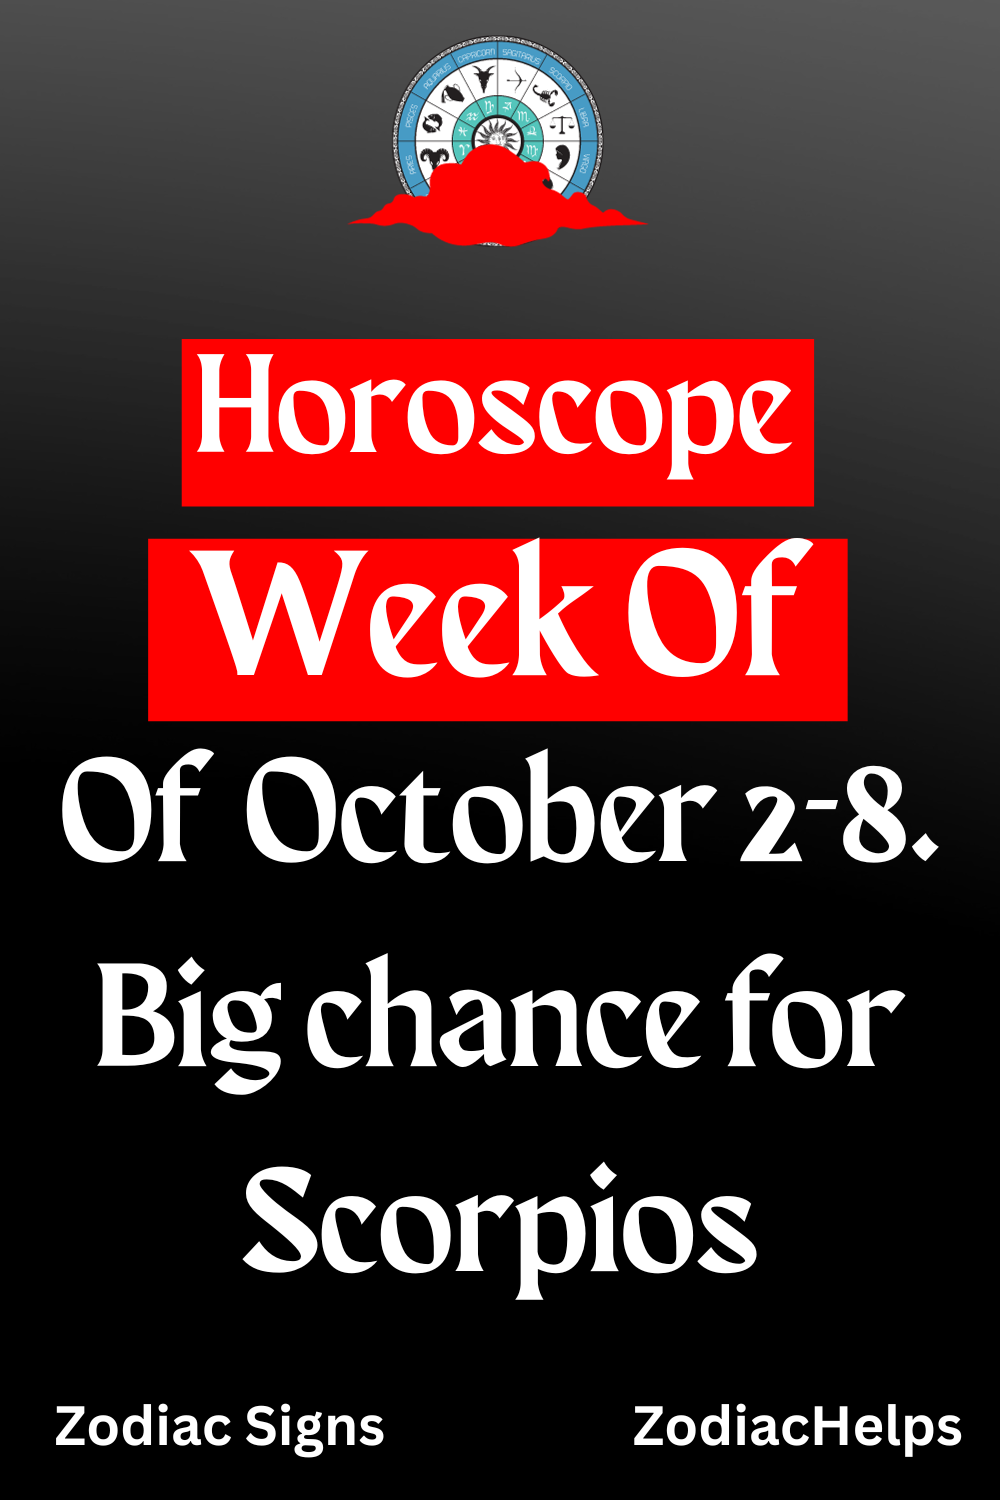 Horoscope For The Week Of October 2-8. Big chance for Scorpios